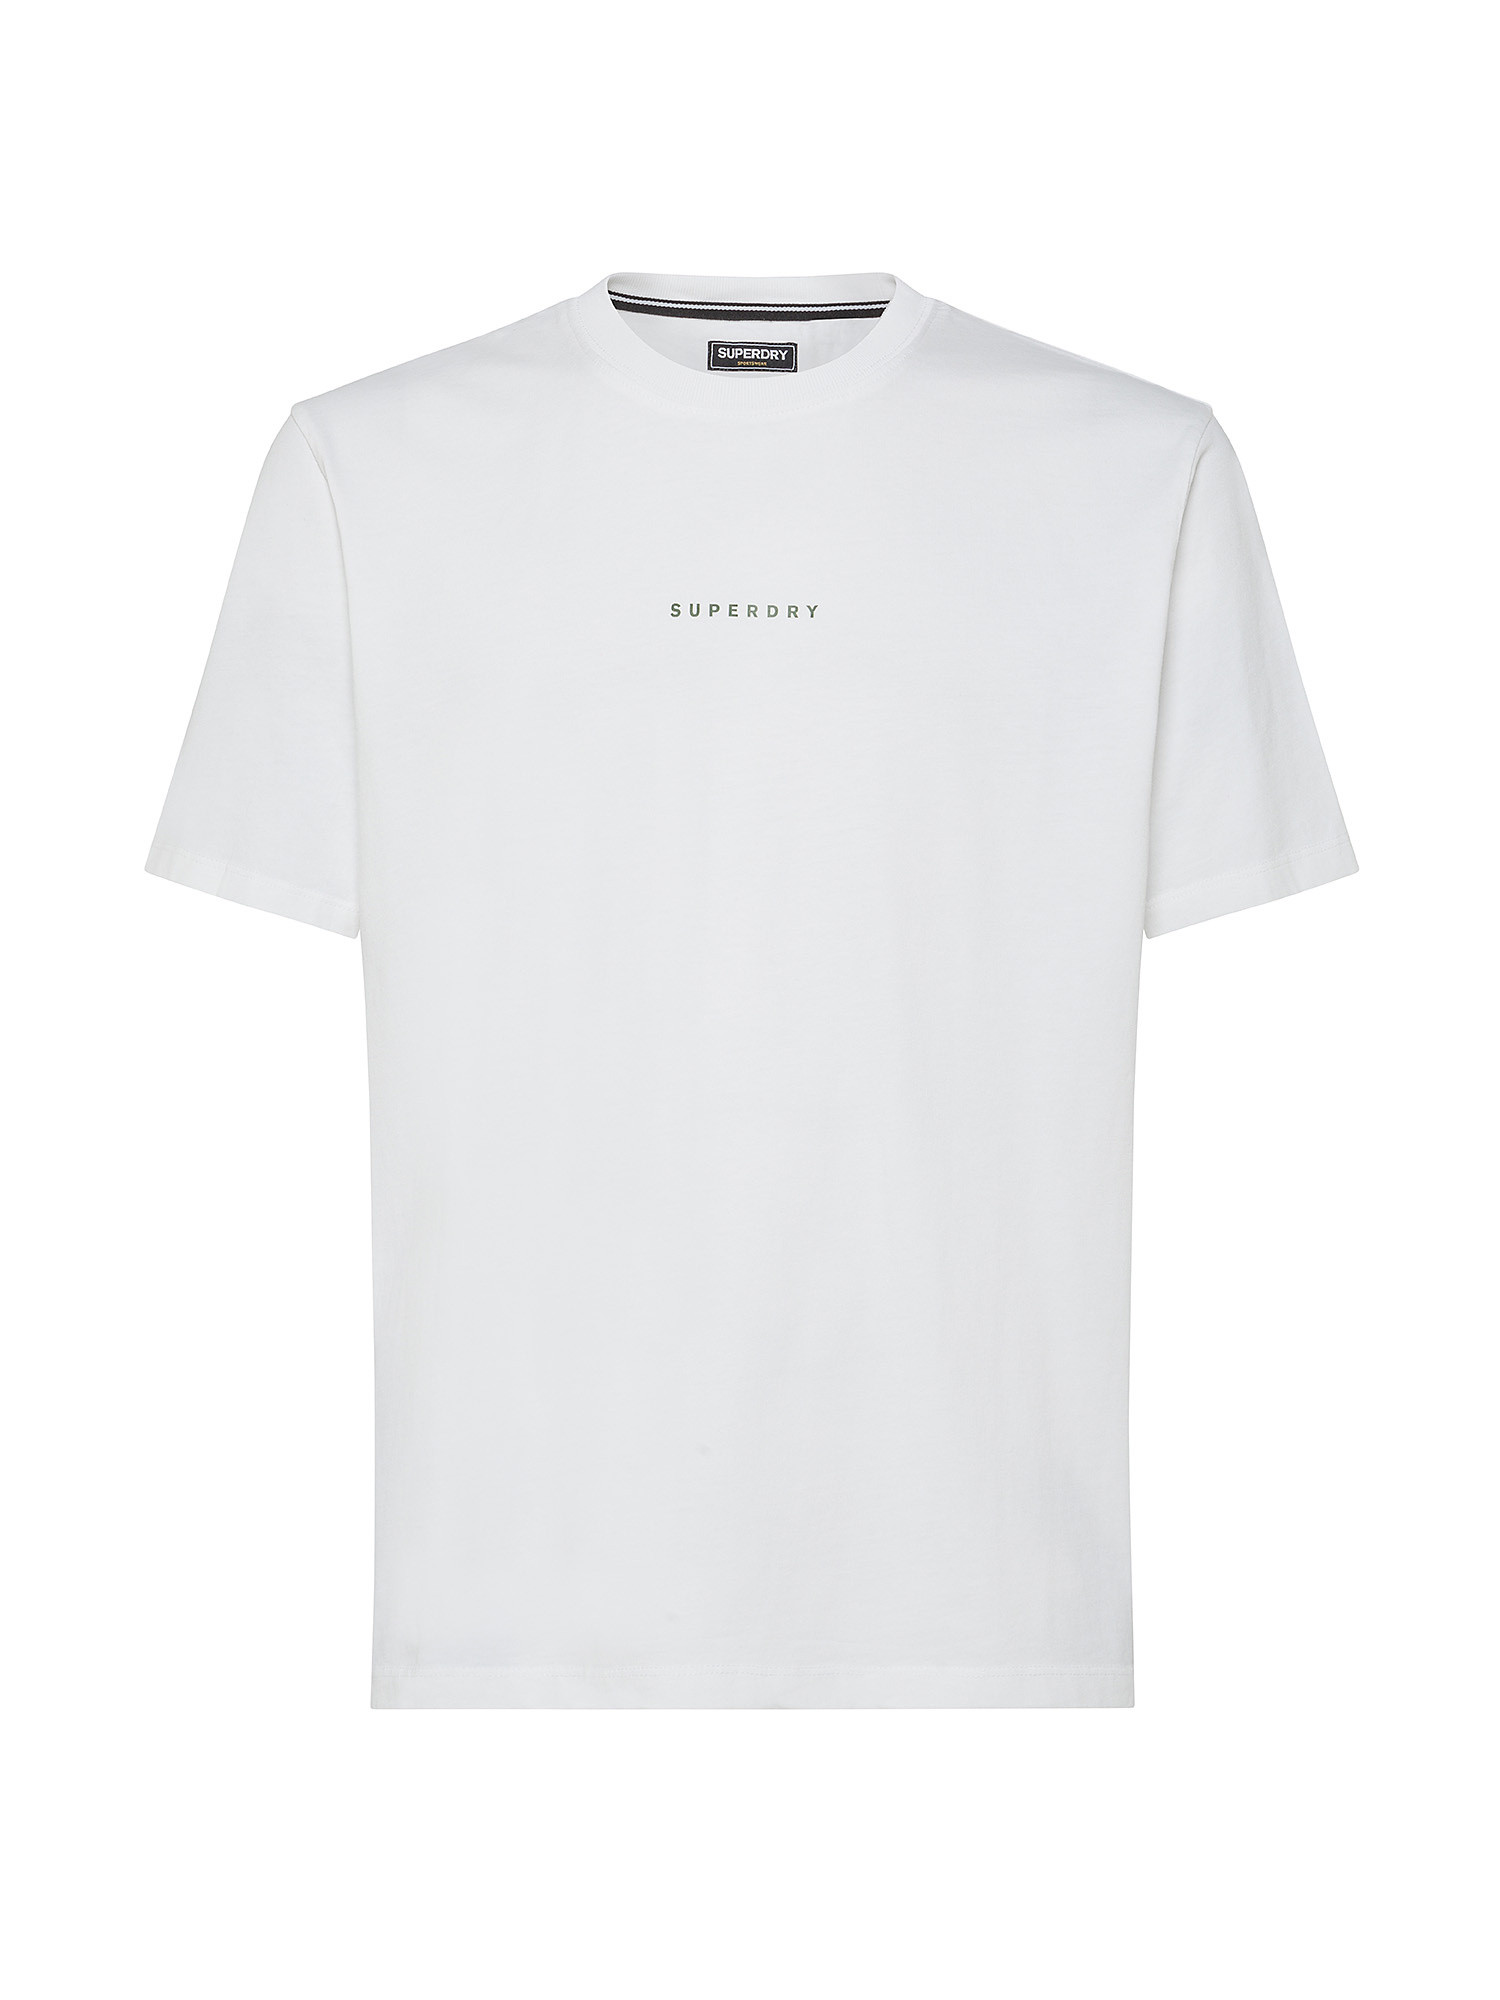 Superdry - T-shirt basica in cotone con mico logo, Bianco, large image number 0